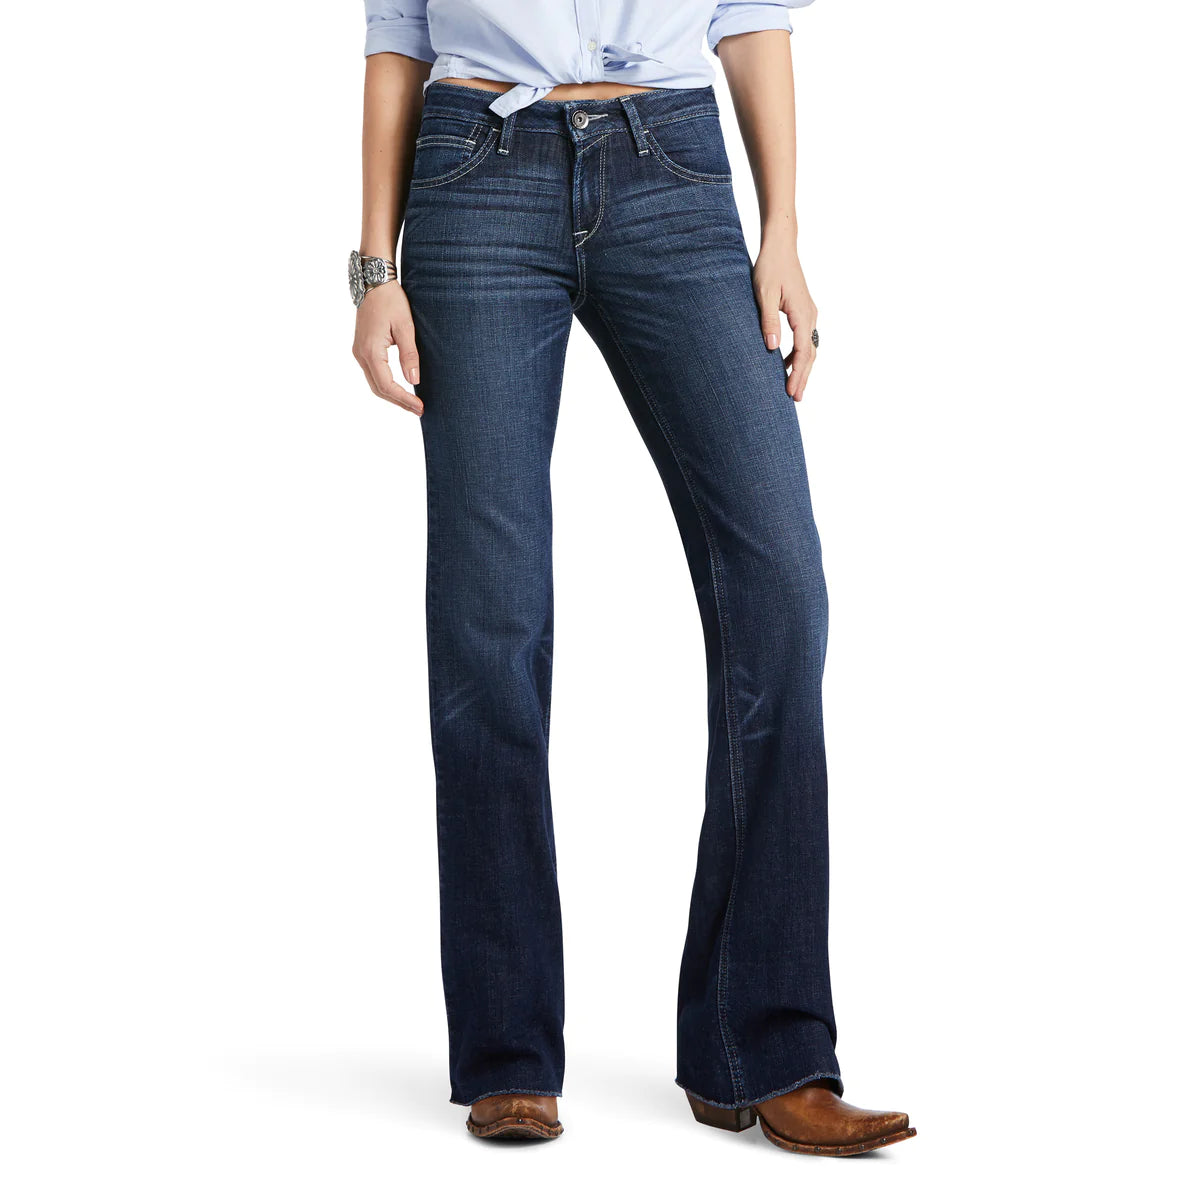 Ariat Wms Trouser Perfect Rise Wide Leg London Rascal - Easter Special